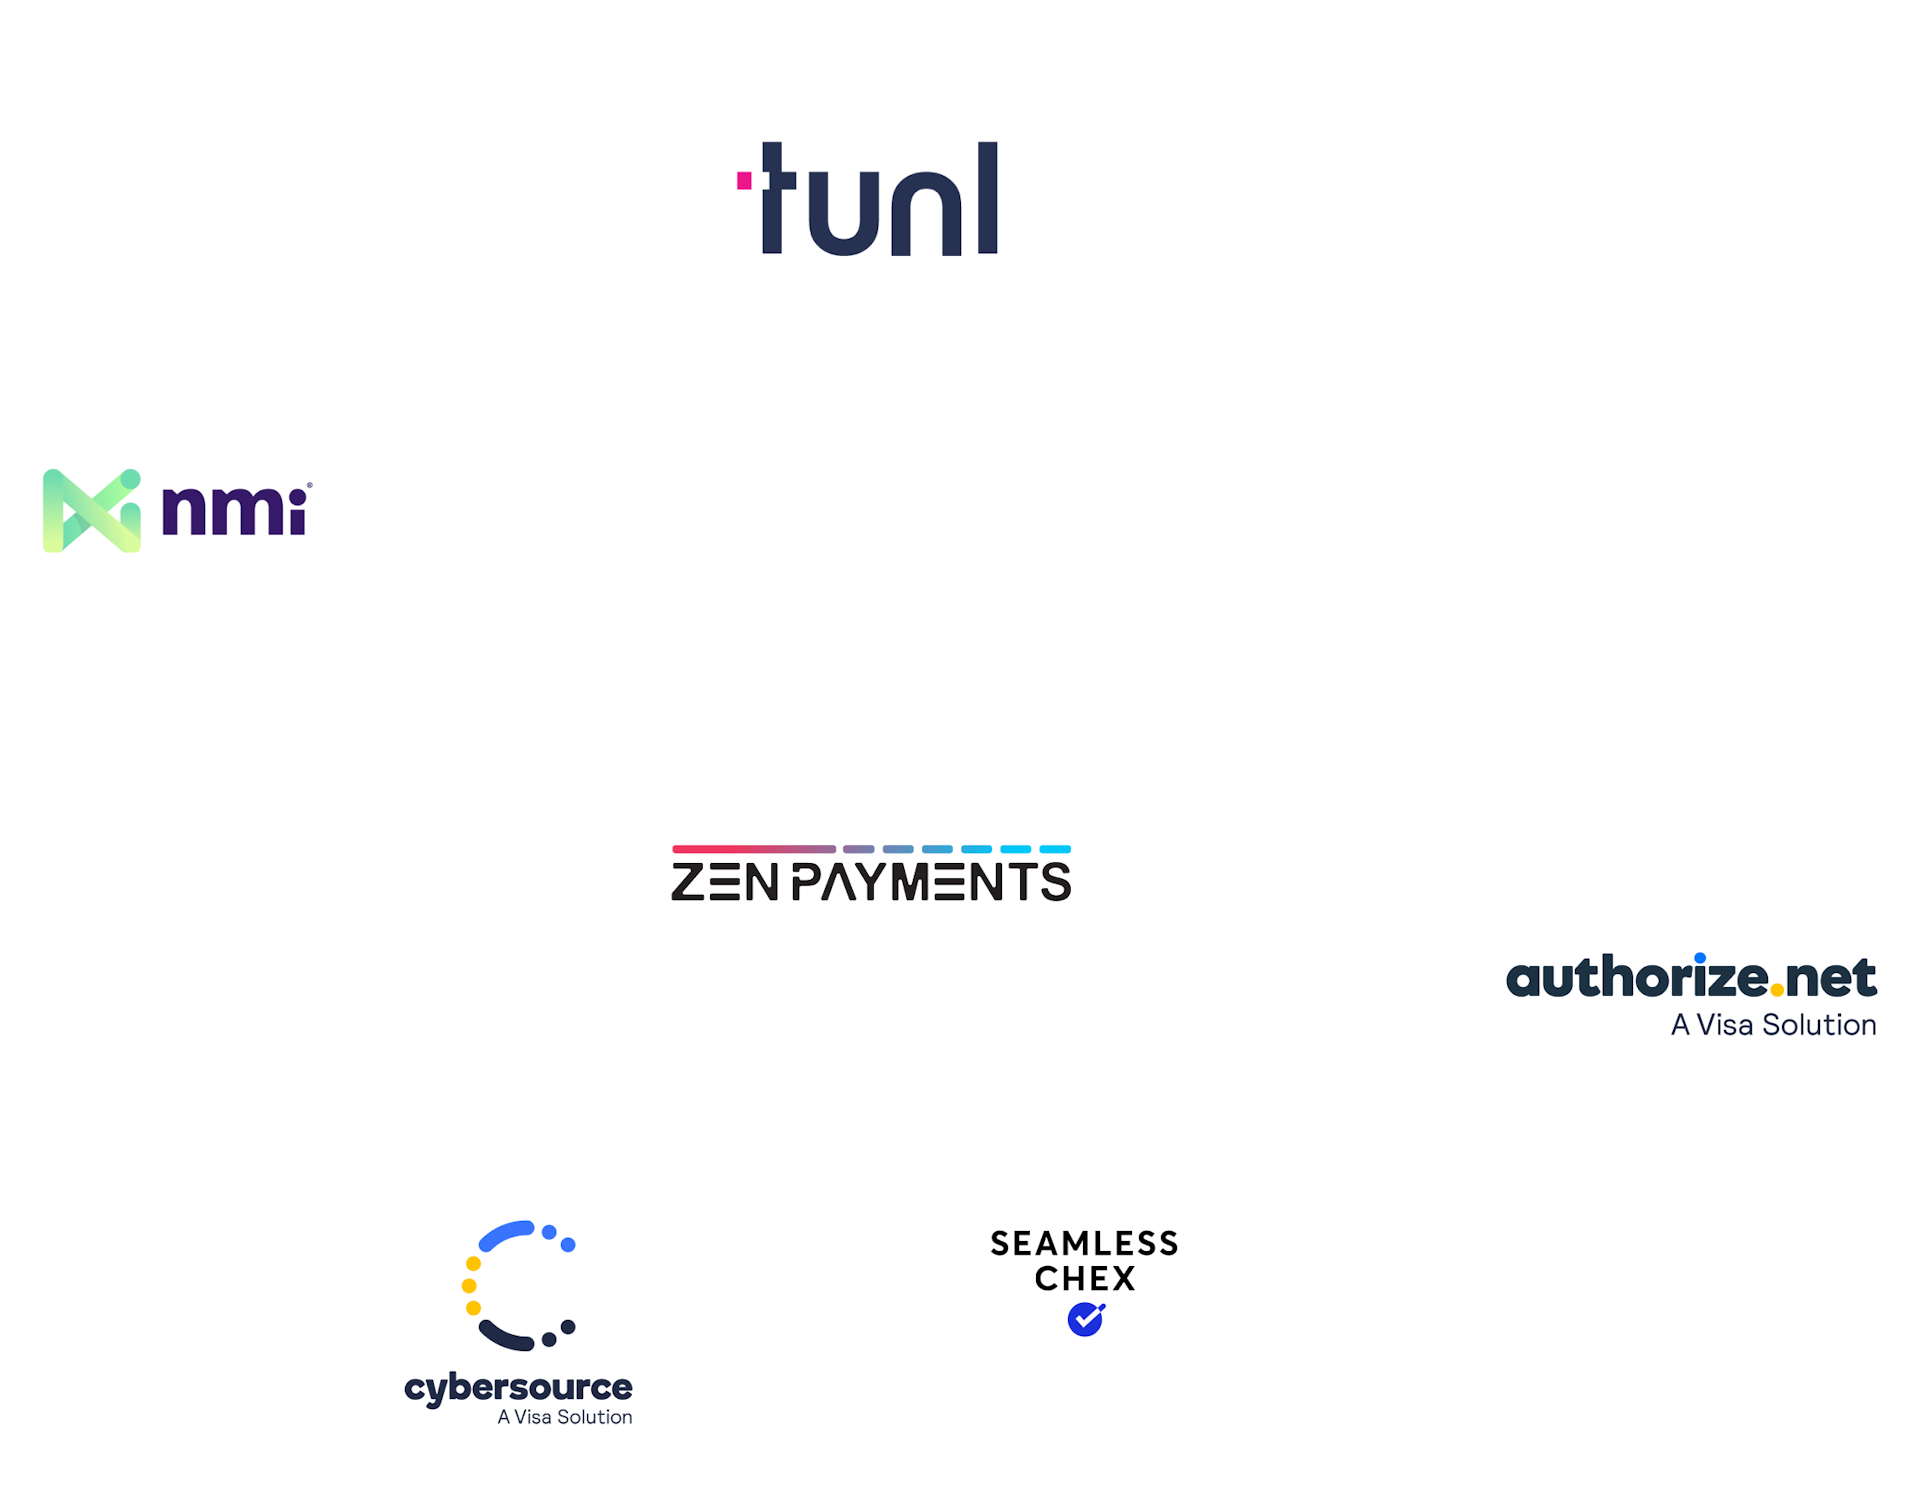 Zen Payments offers a variety of gateway solutions